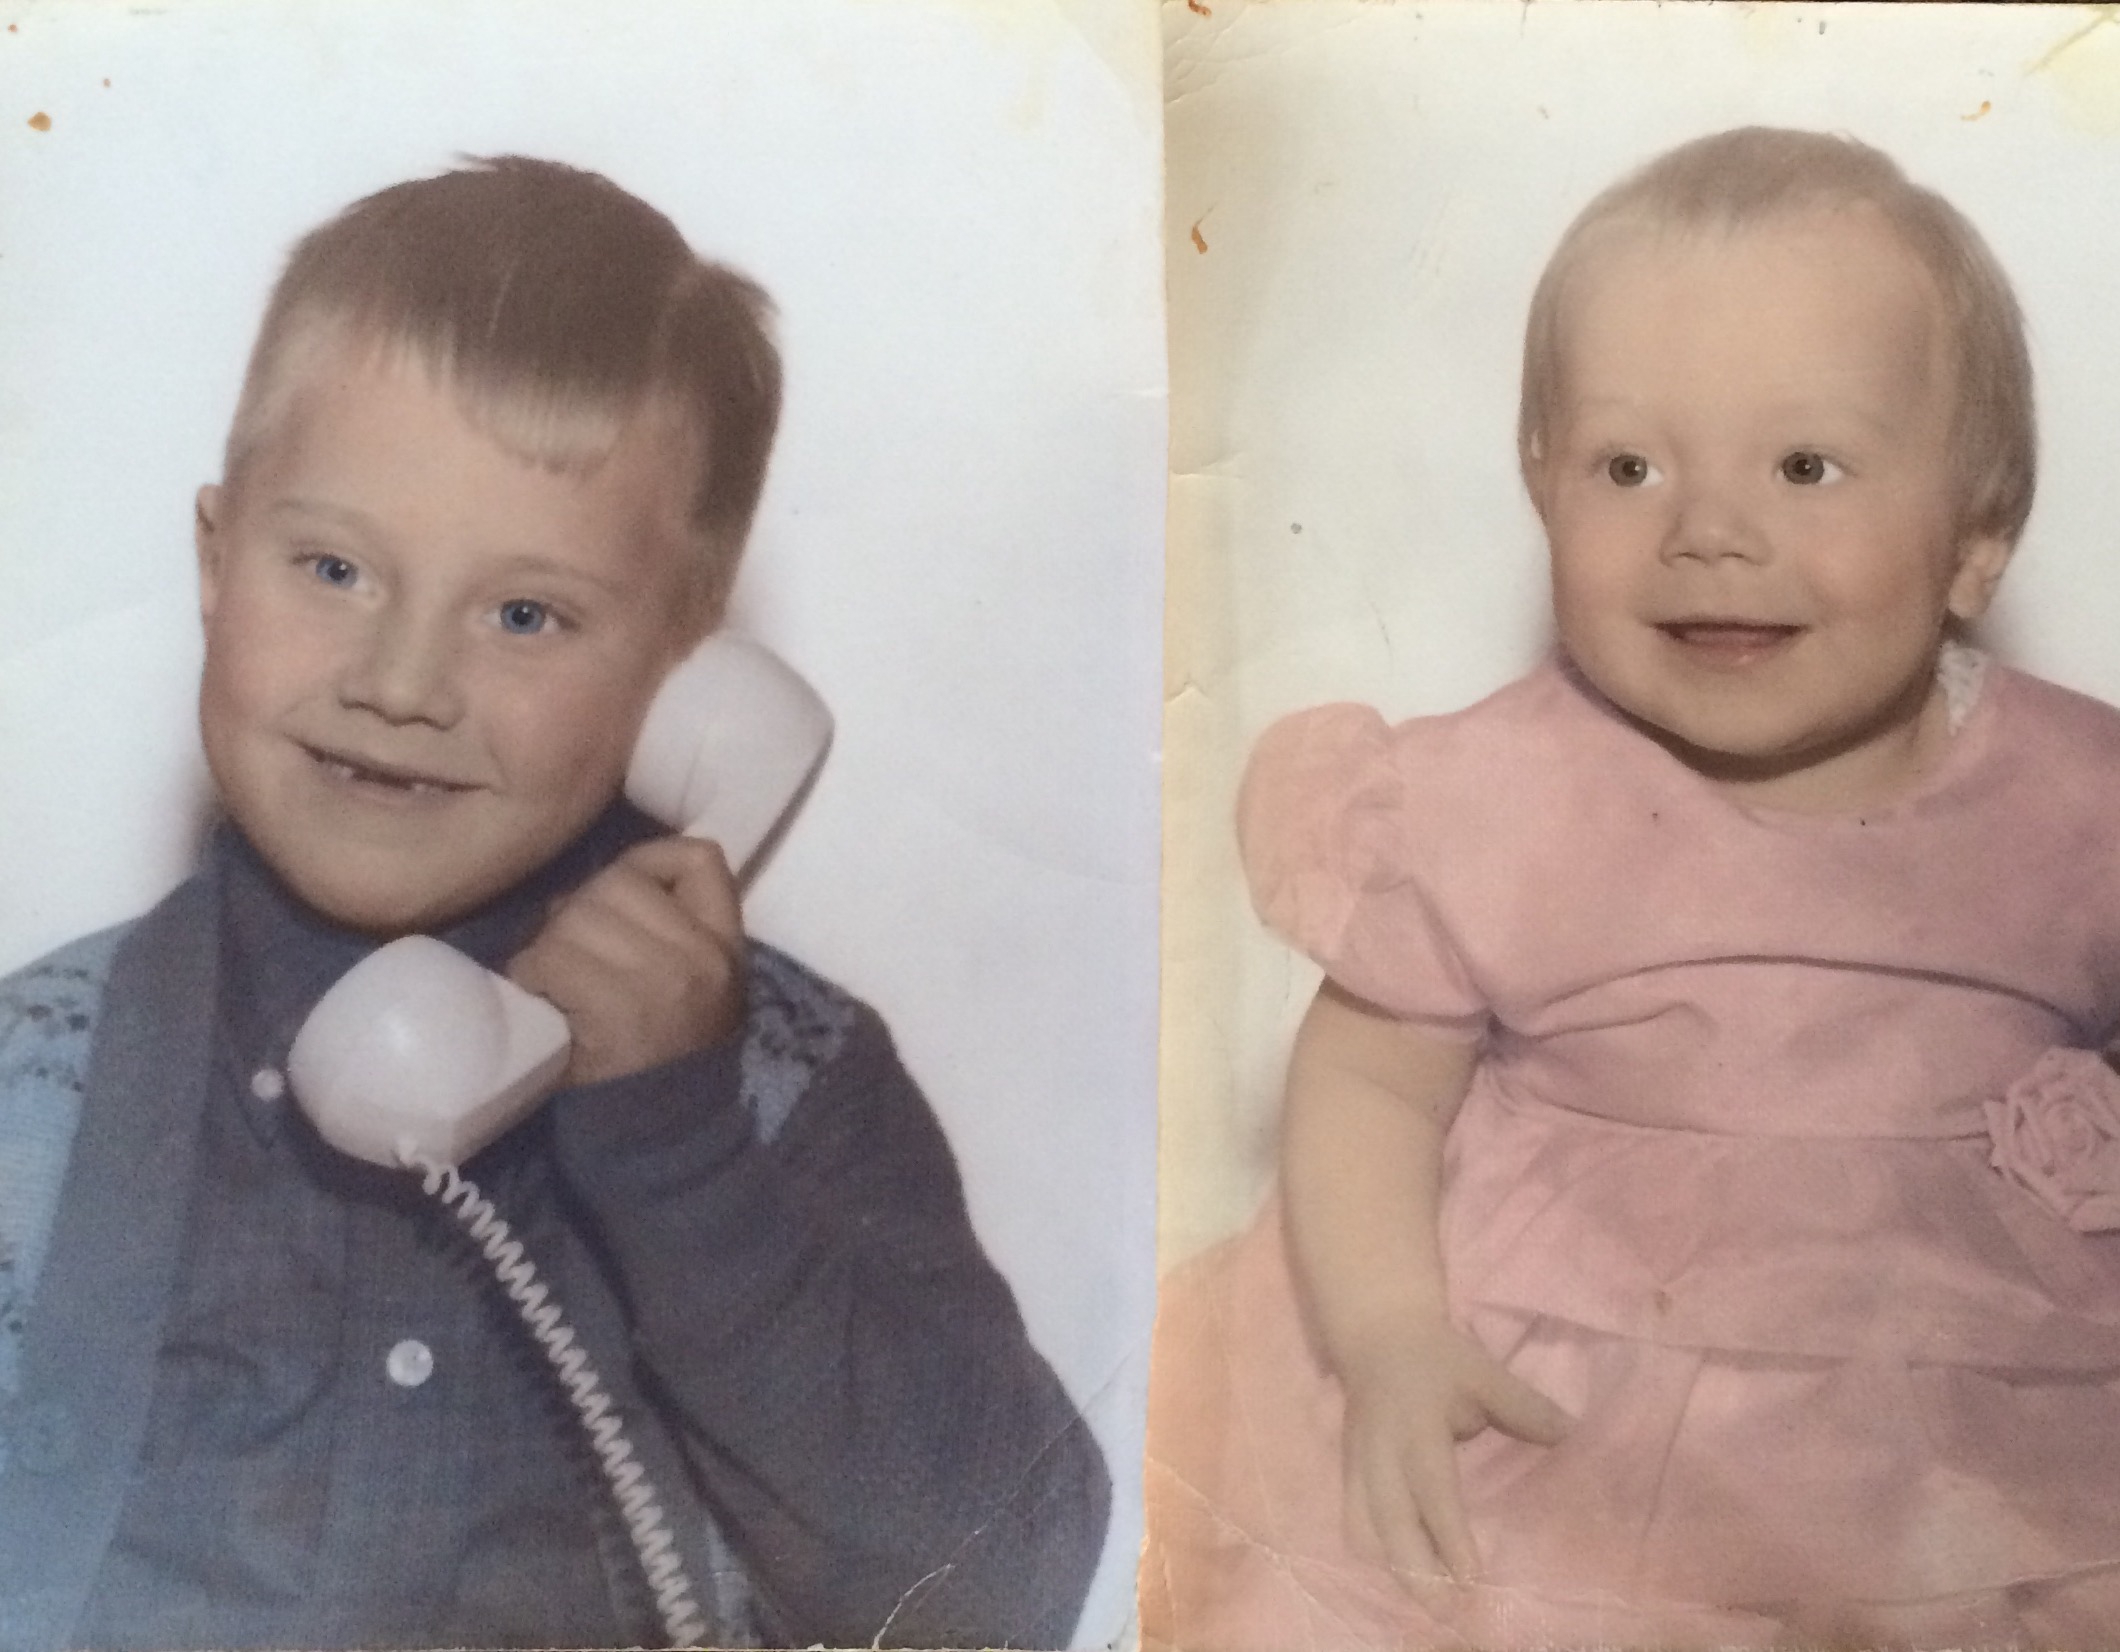 My brother and I over 54 years ago. Sweet memories!